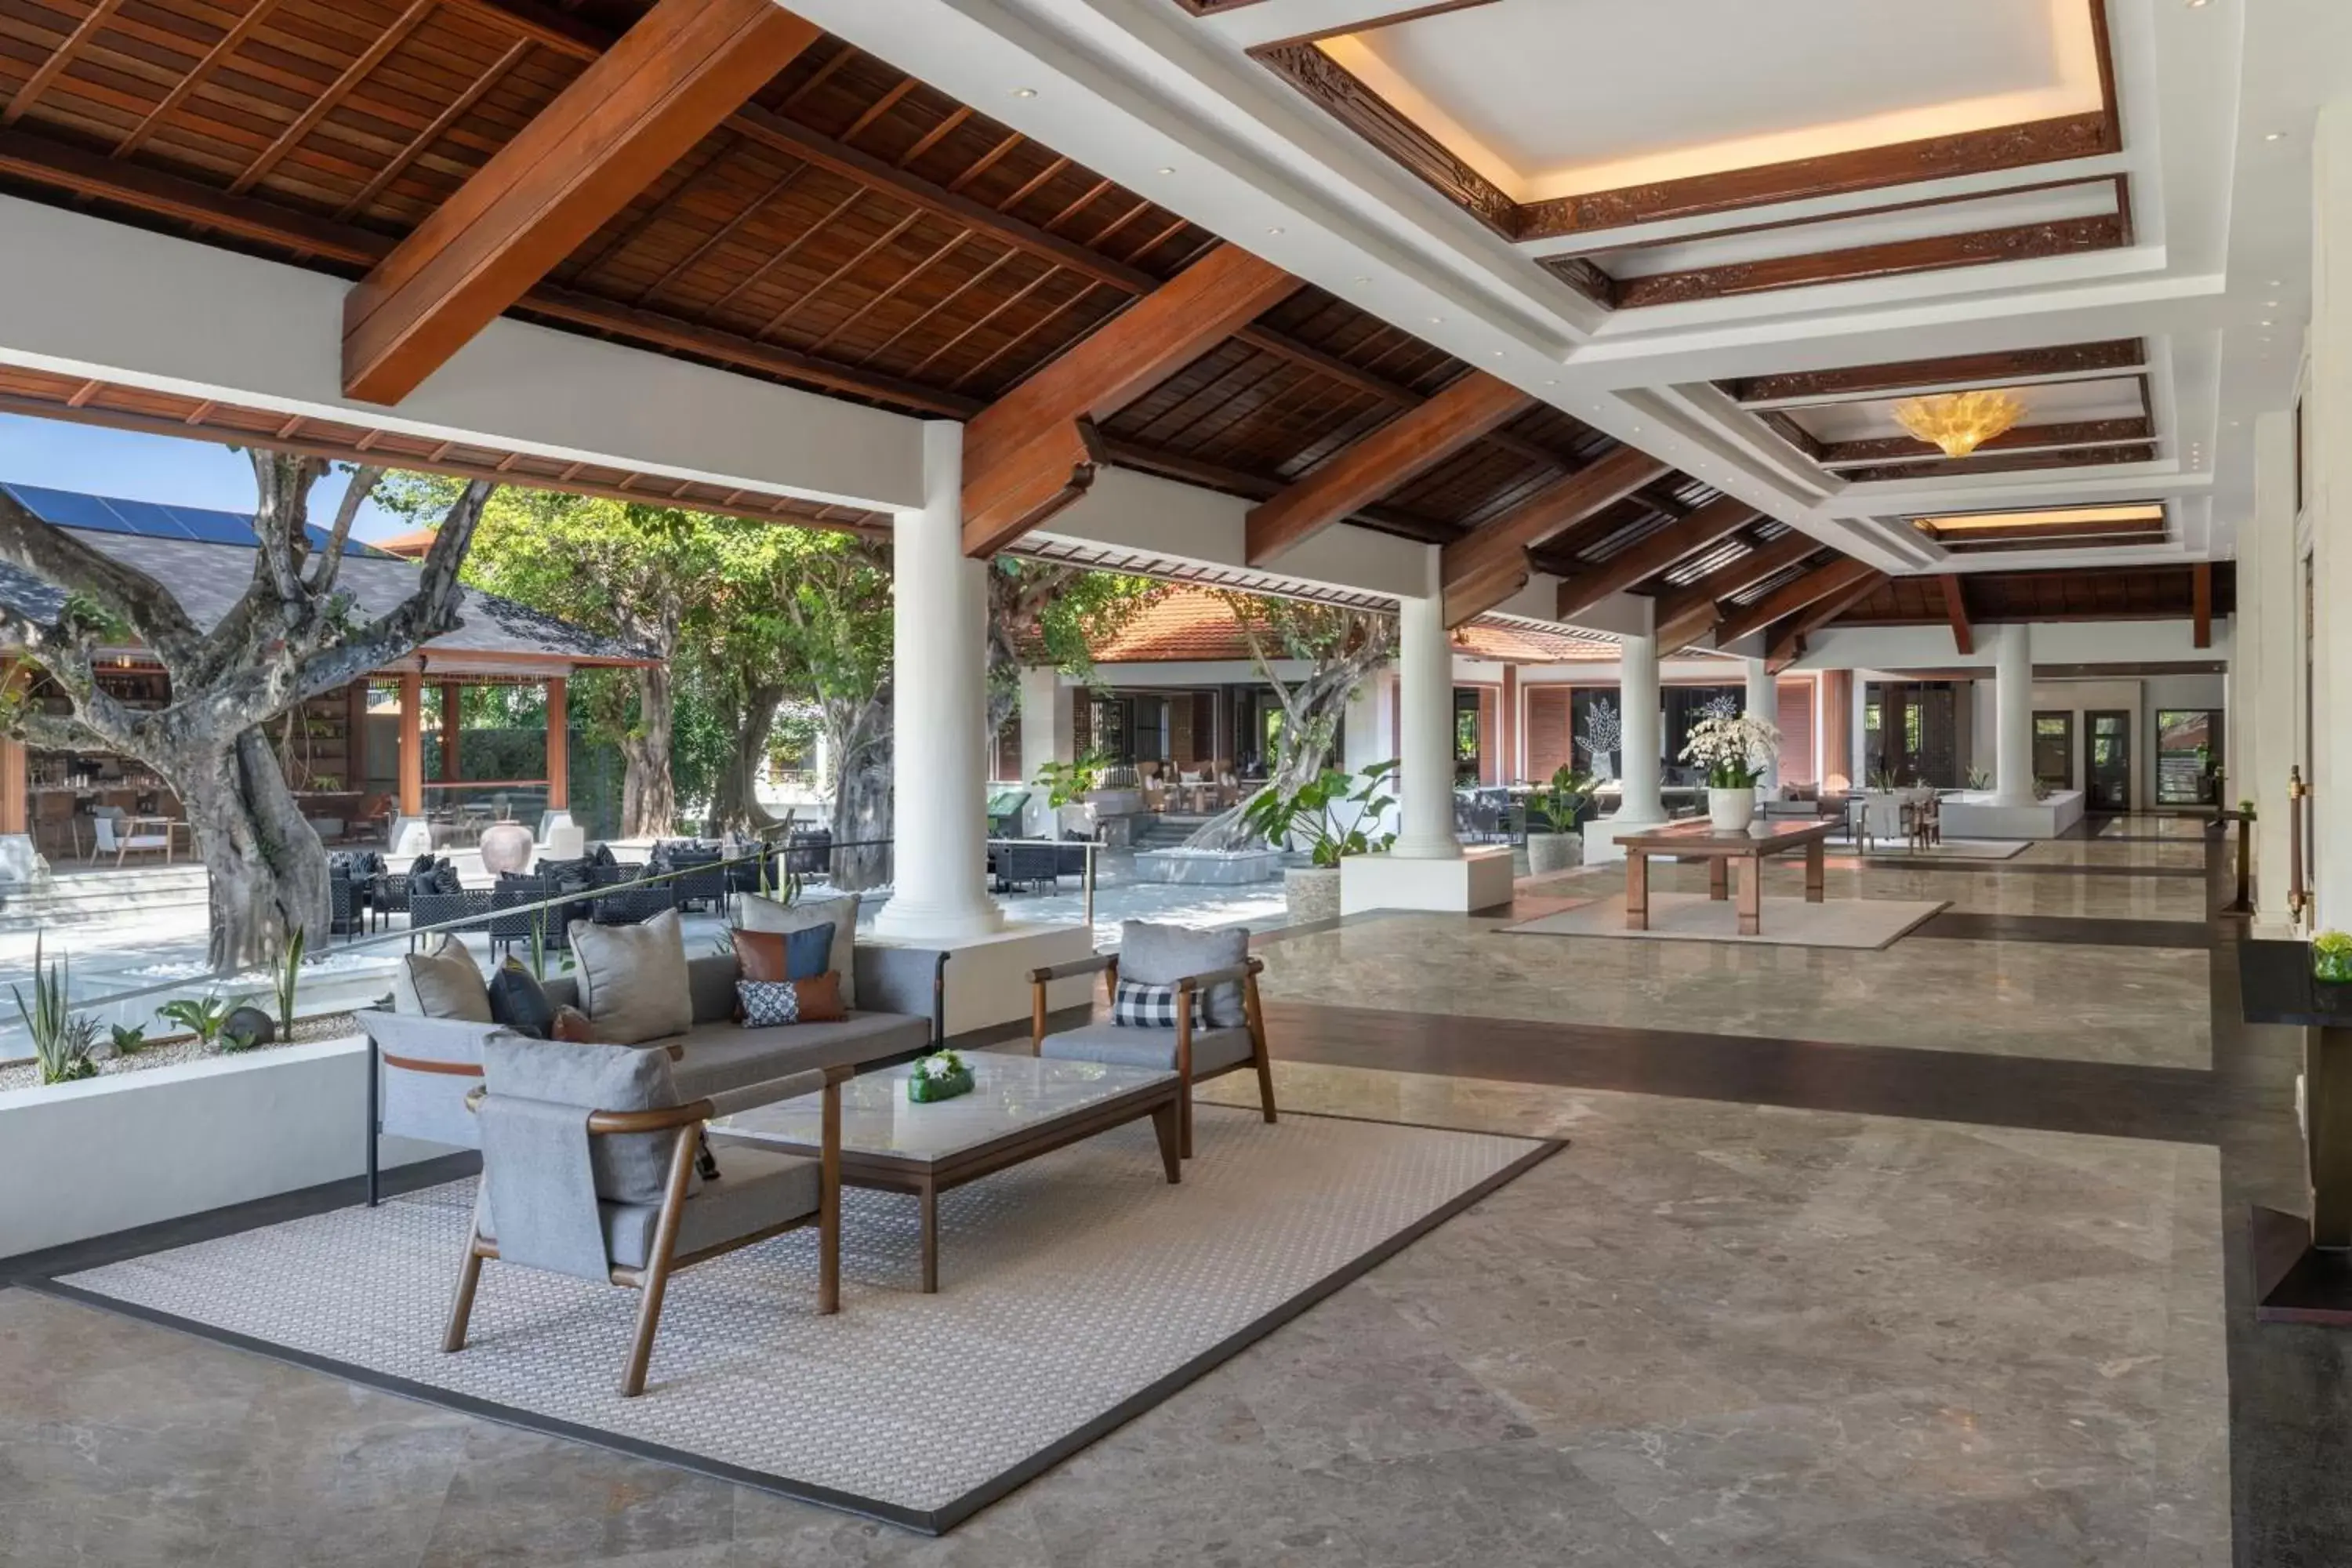 Meeting/conference room in The Laguna, A Luxury Collection Resort & Spa, Nusa Dua, Bali